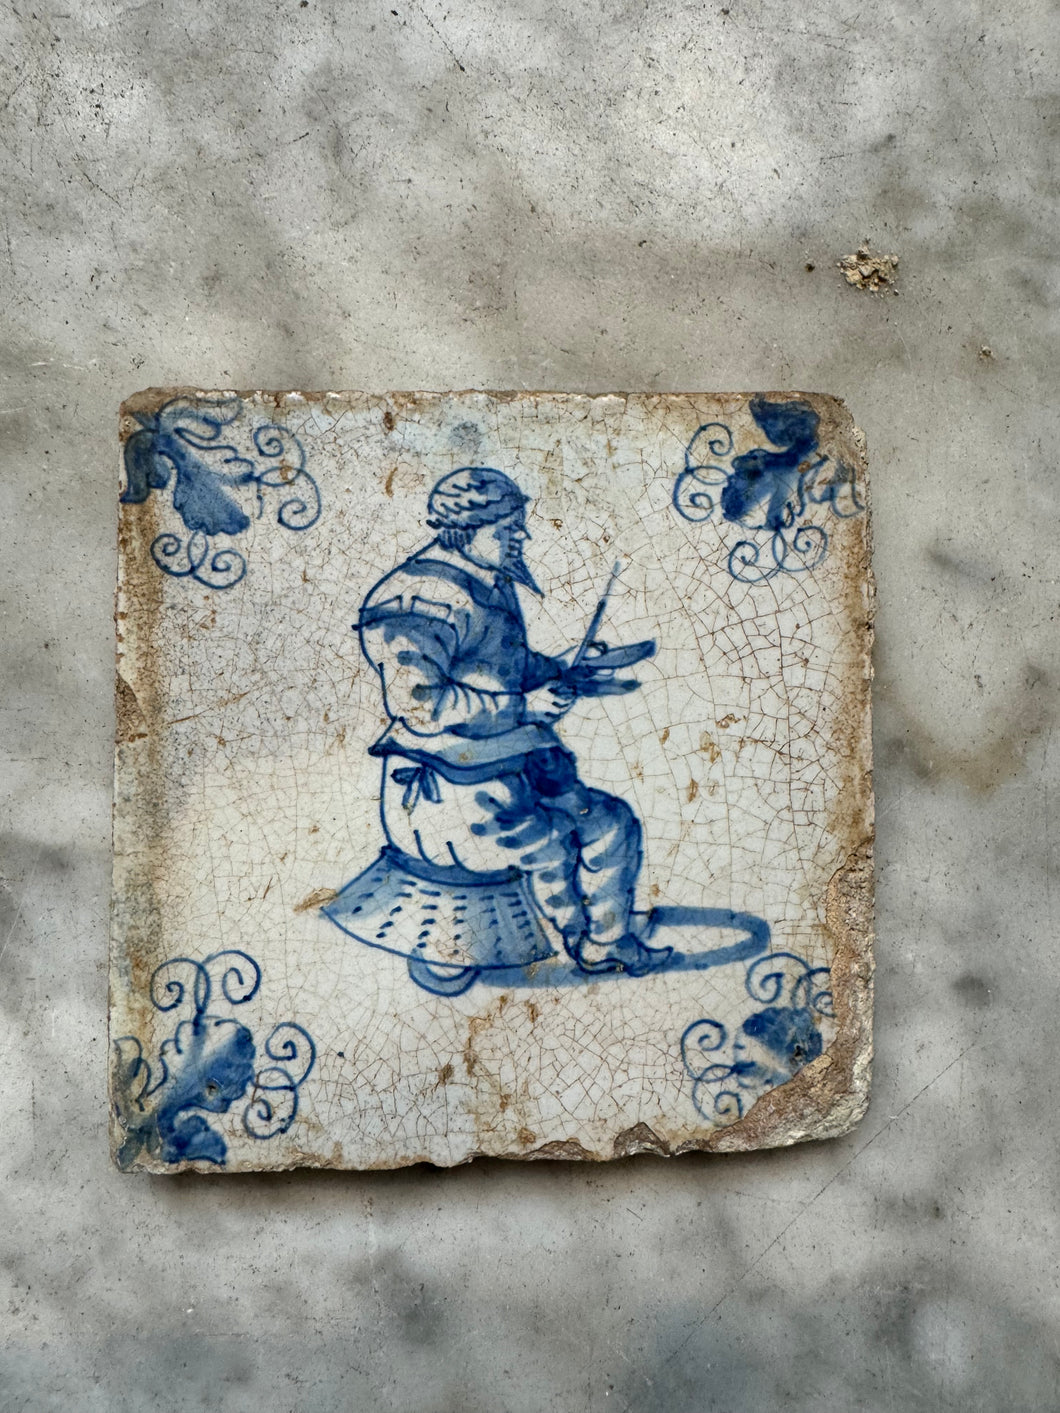 T17) delft tile with profession/ sharping knives